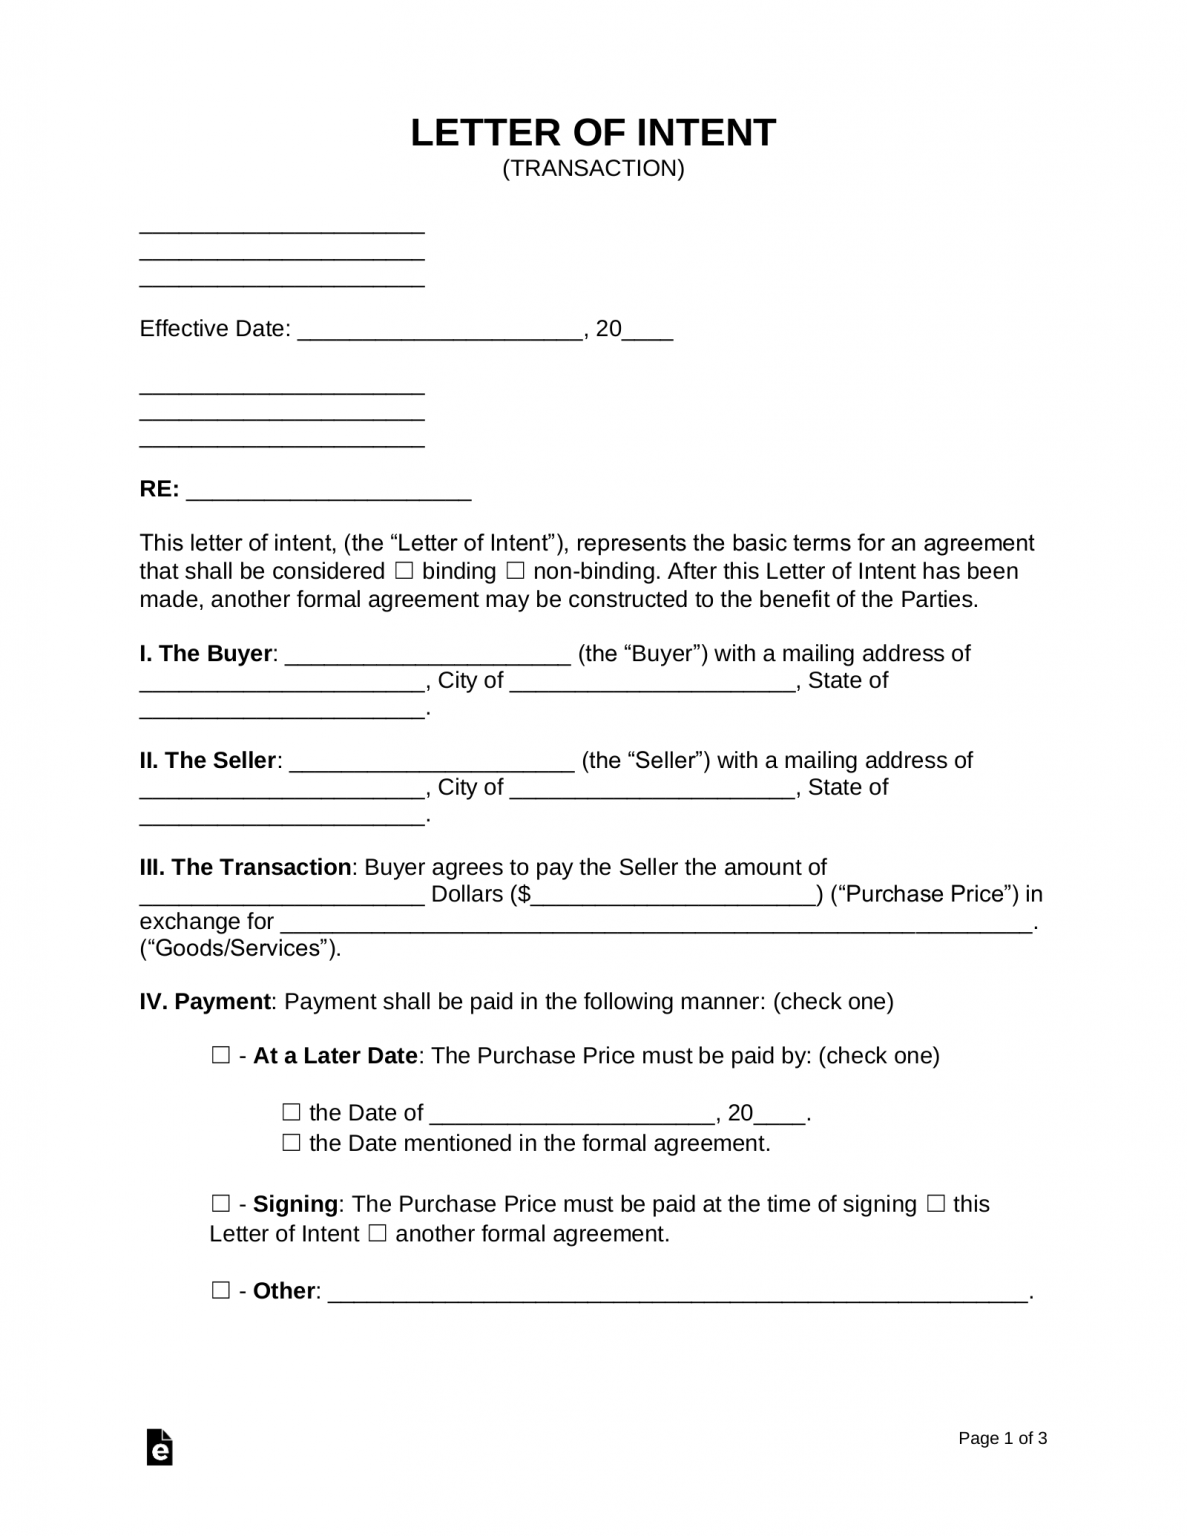 free-letter-of-intent-loi-templates-14-pdf-word-eforms